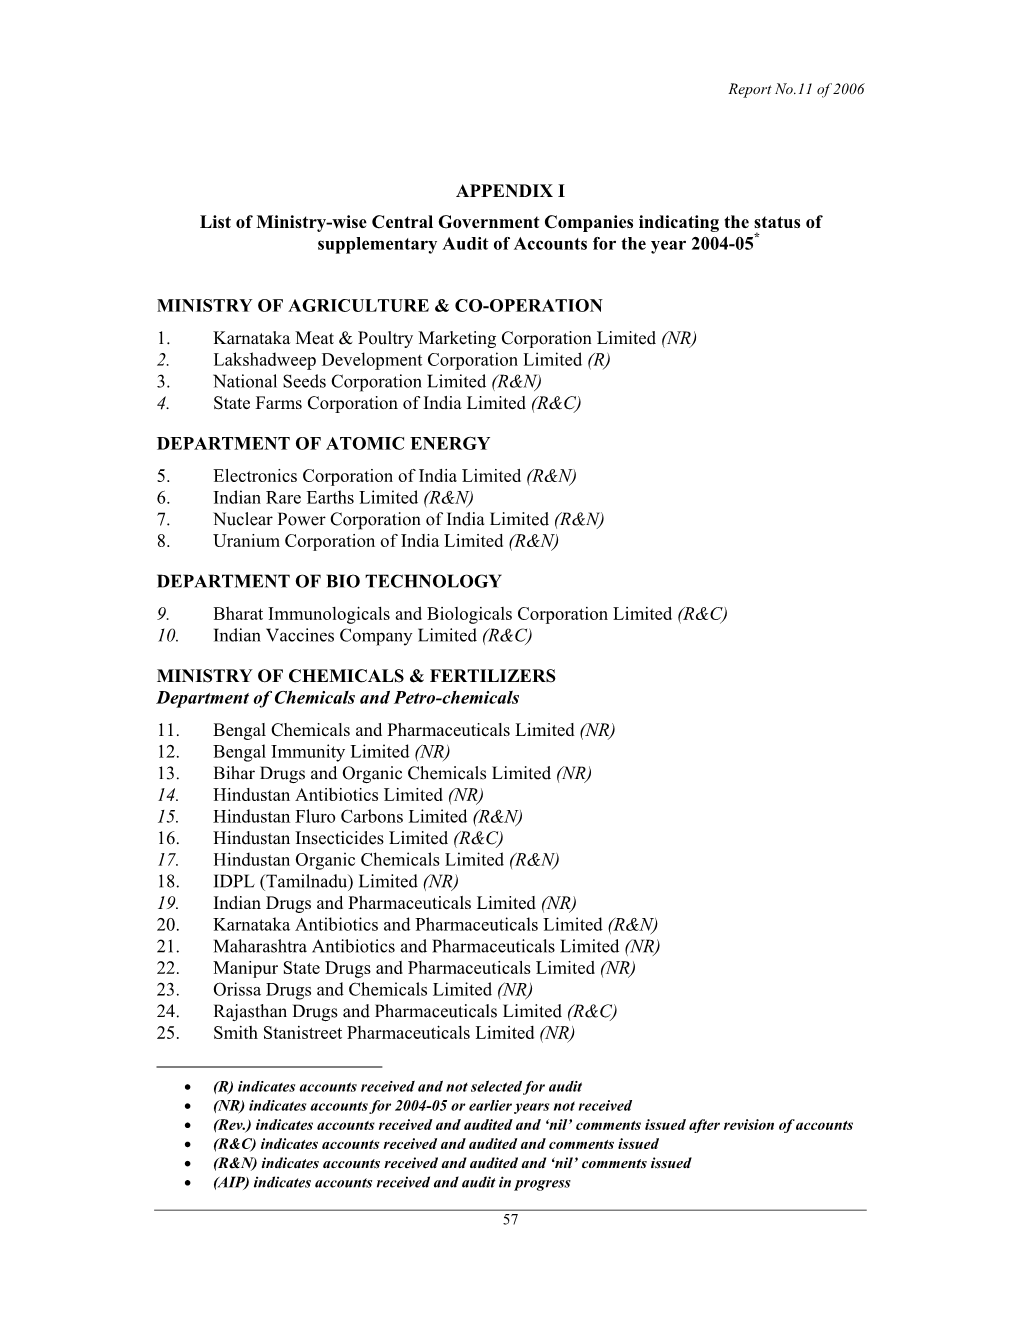 APPENDIX I List of Ministry-Wise Central Government Companies Indicating the Status of Supplementary Audit of Accounts for the Year 2004-05*